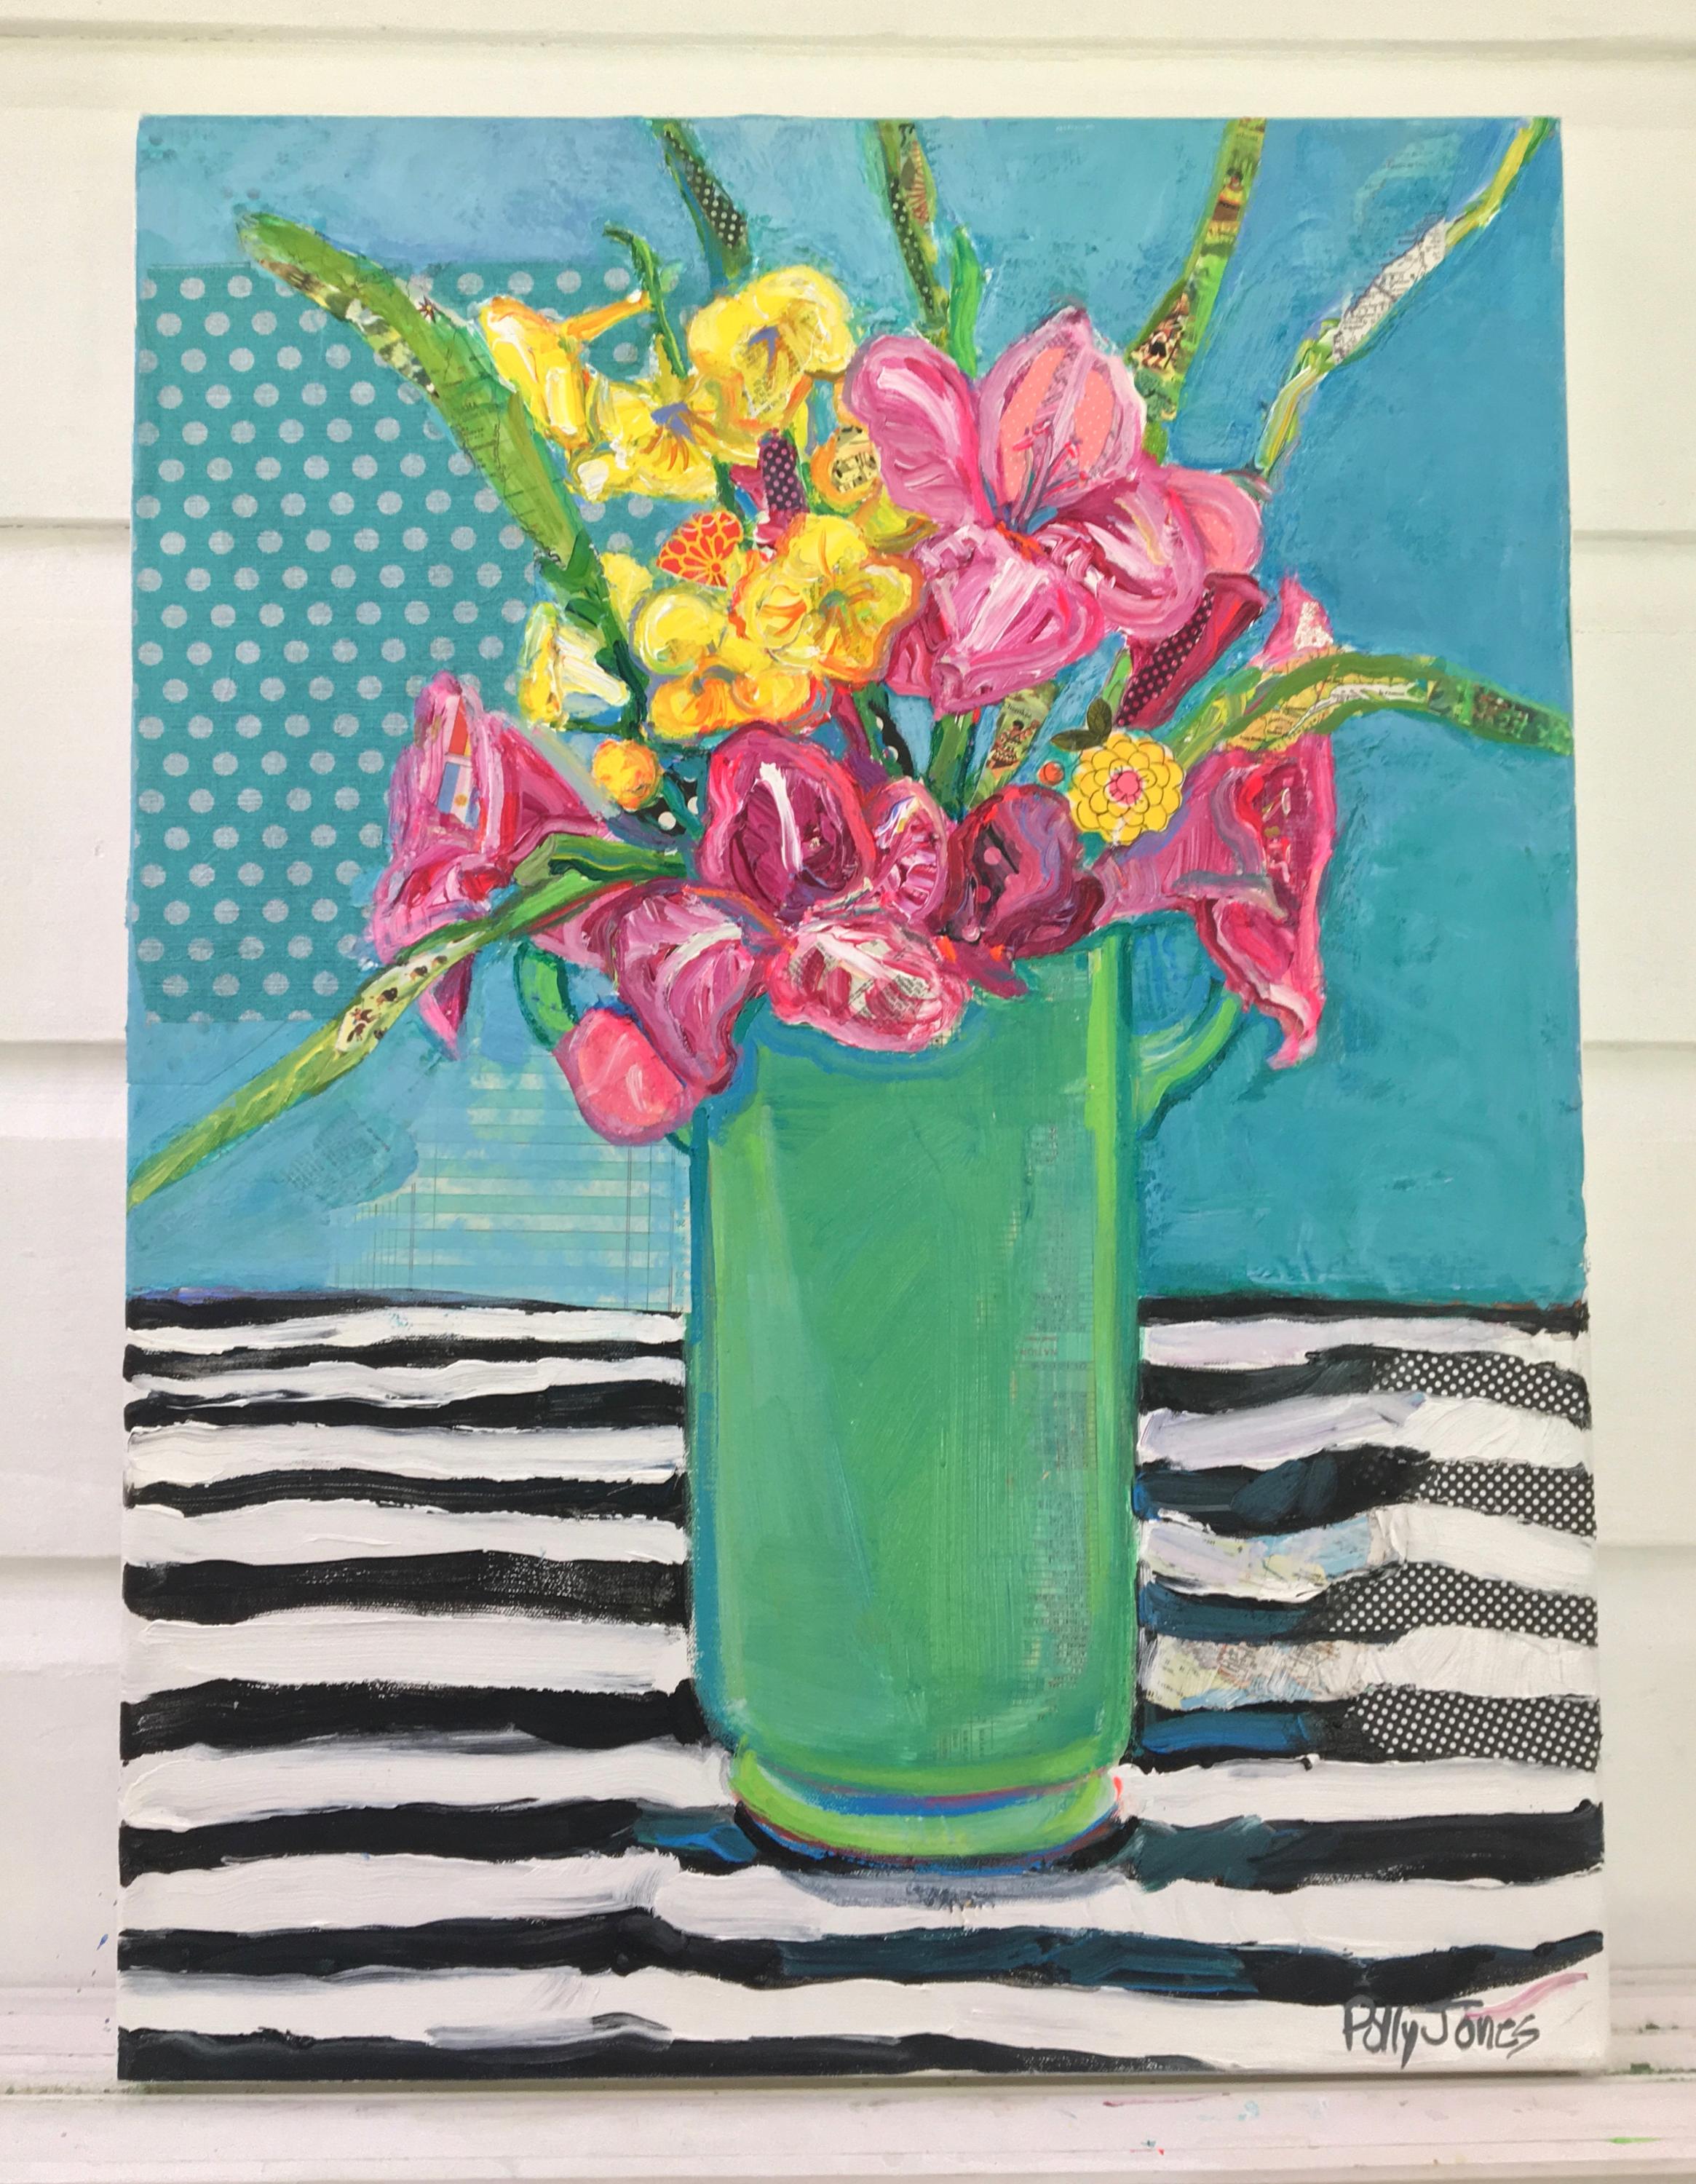 <p>Artist Comments<br />A vibrant bouquet of summer gladiolas from Polly Jones's garden. Layers of book pages, lists and maps appear in the outline of the flowers and vase. Color and line work offer a subtle nod to Matisse. For Polly's signature